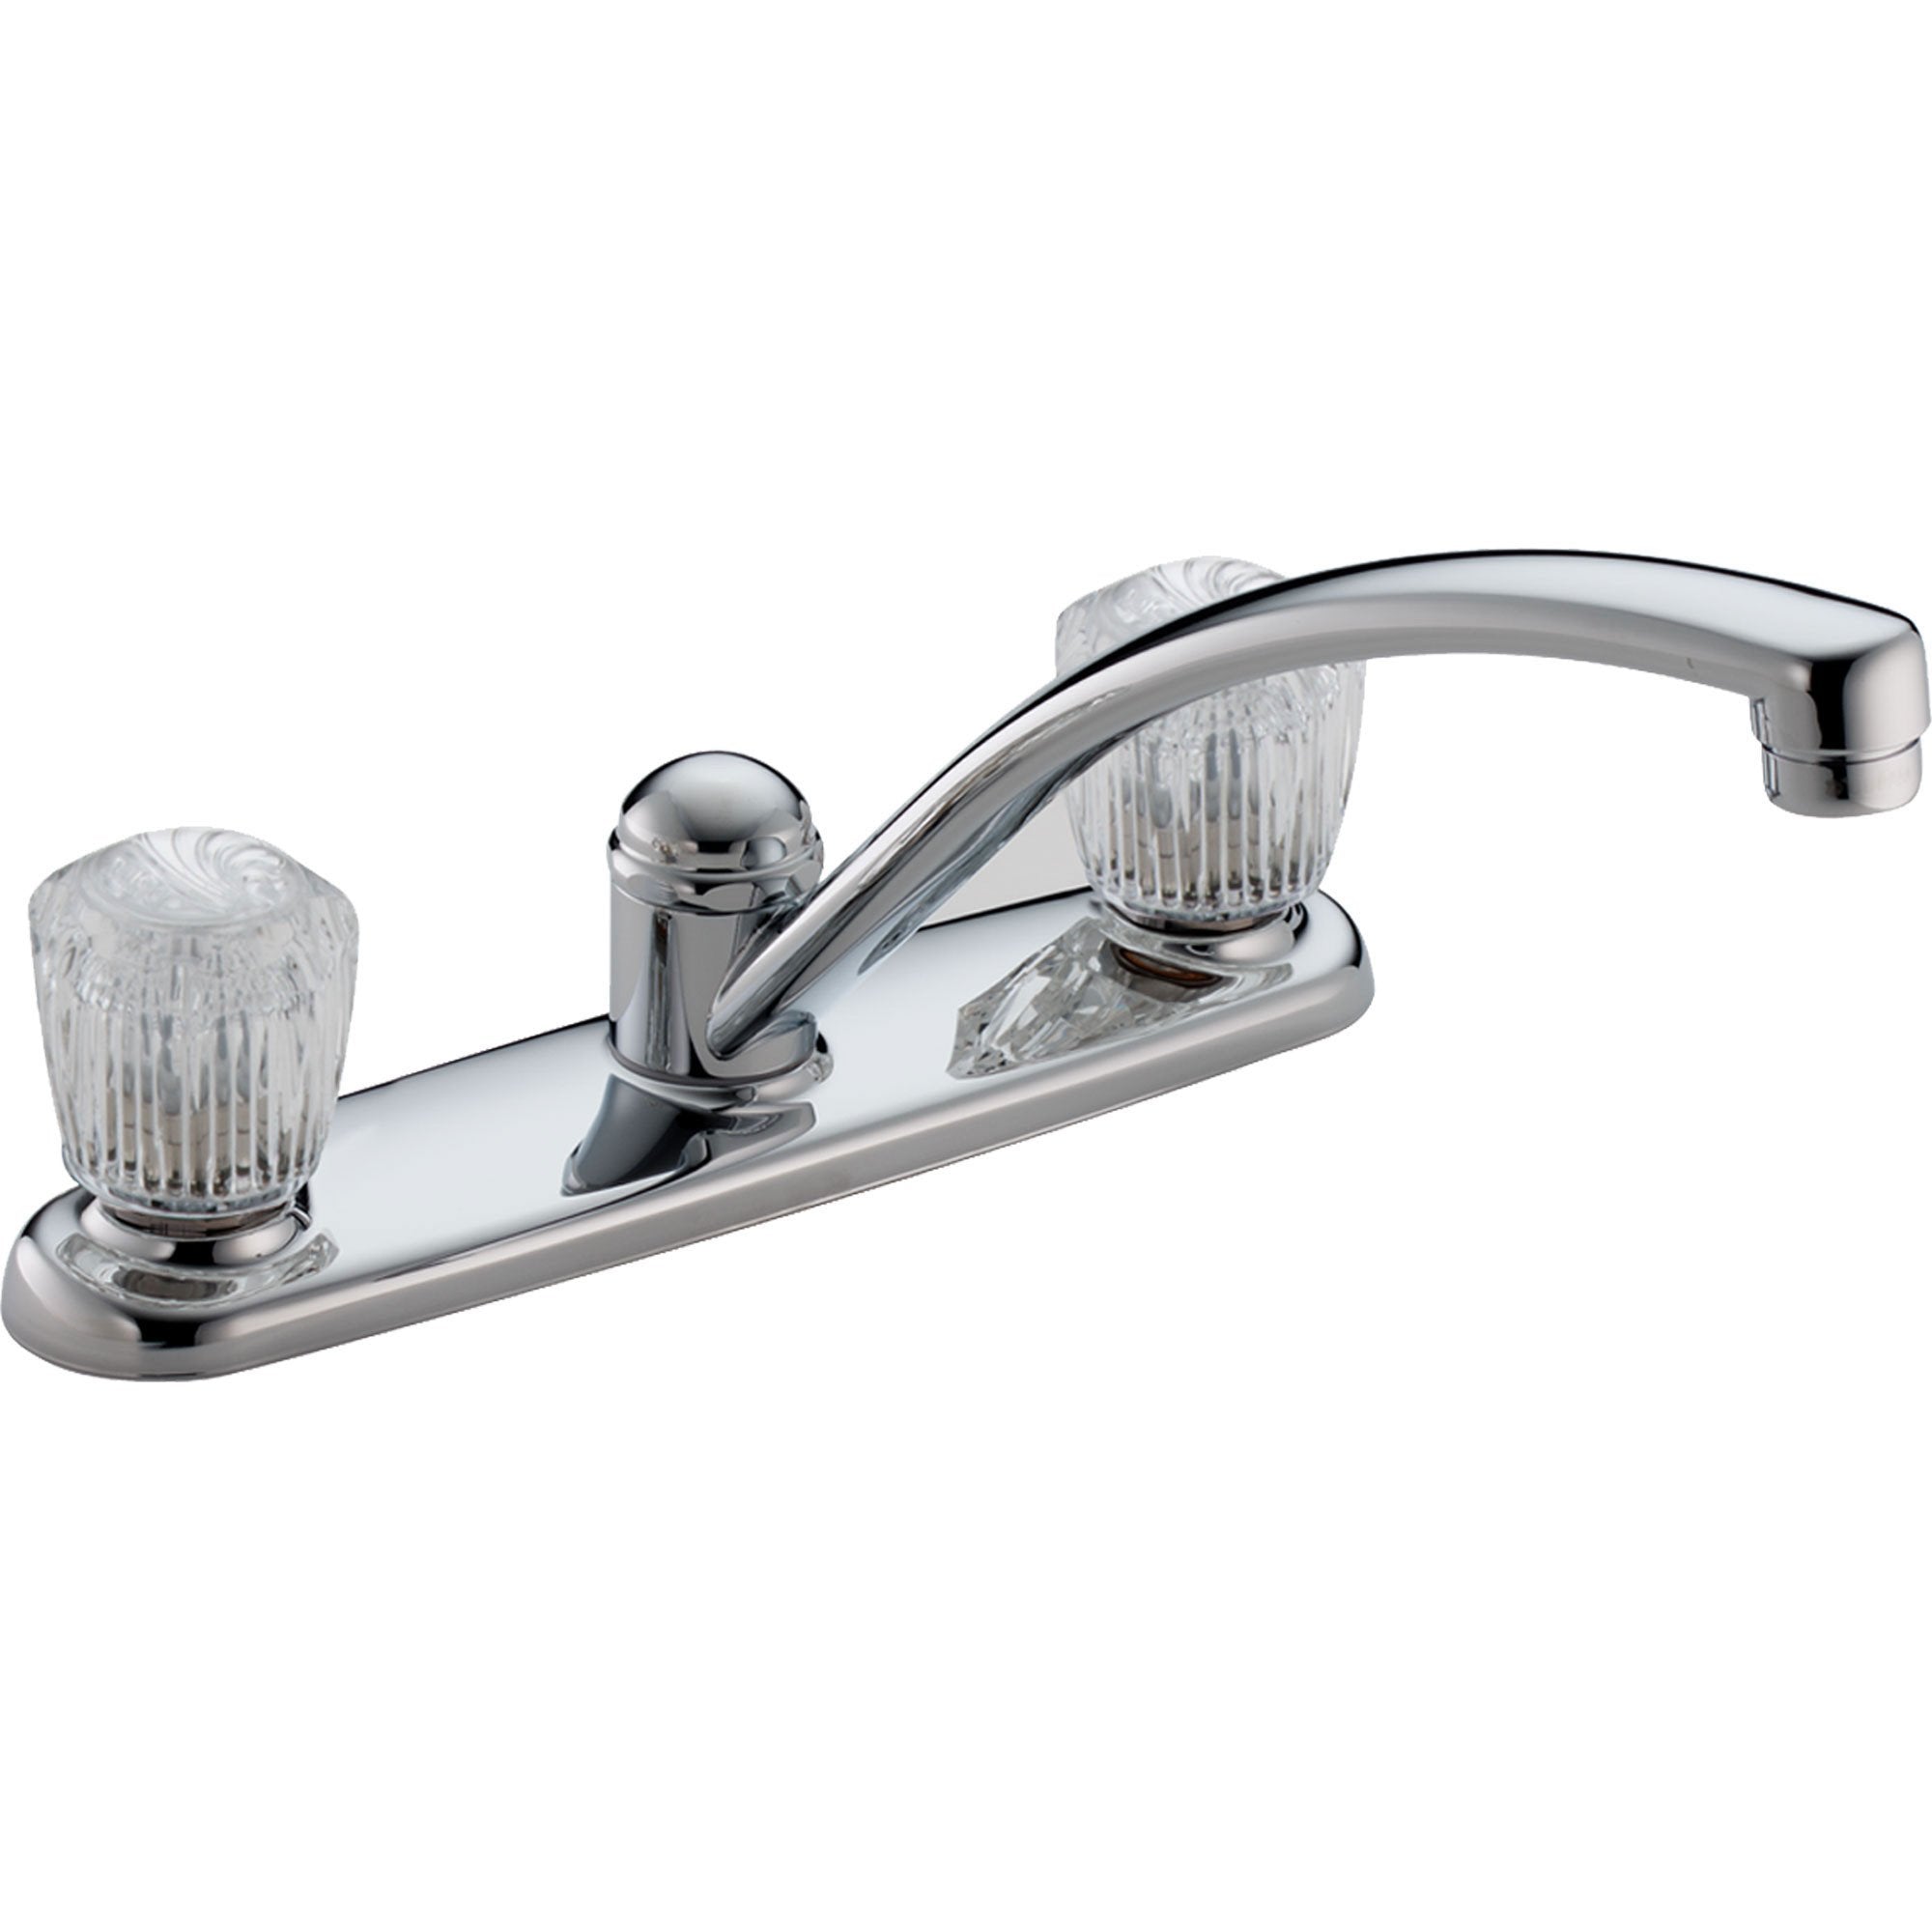 Delta Classic 2-Handle Acrylic Knob Kitchen Faucet in Chrome 474523